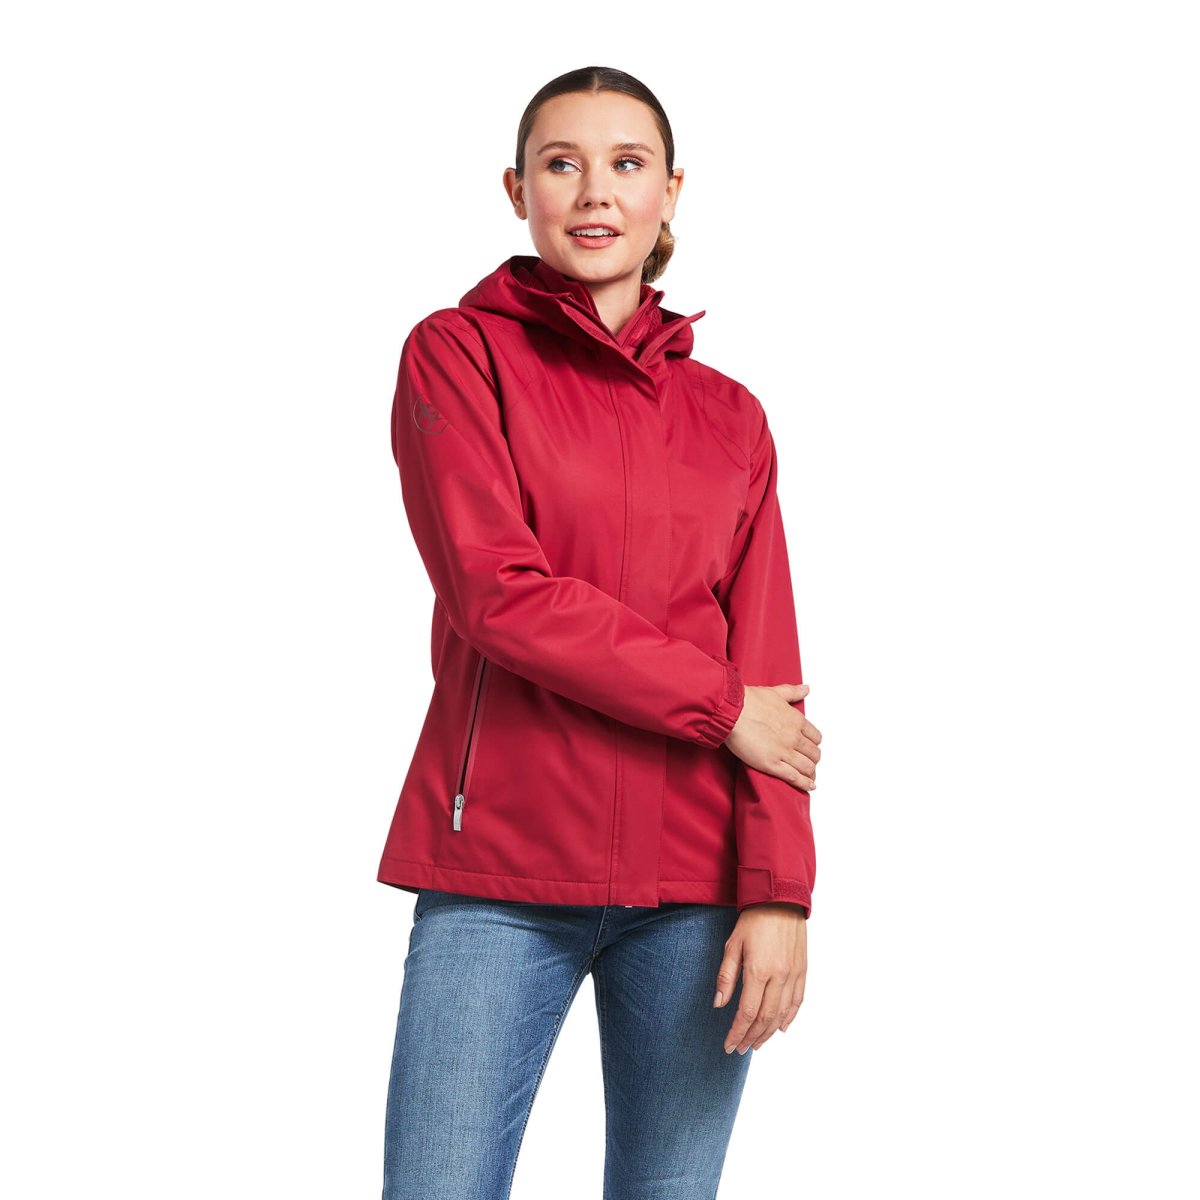 Ariat Womens Spectator Waterproof Jacket - Red Bud - Extra Large